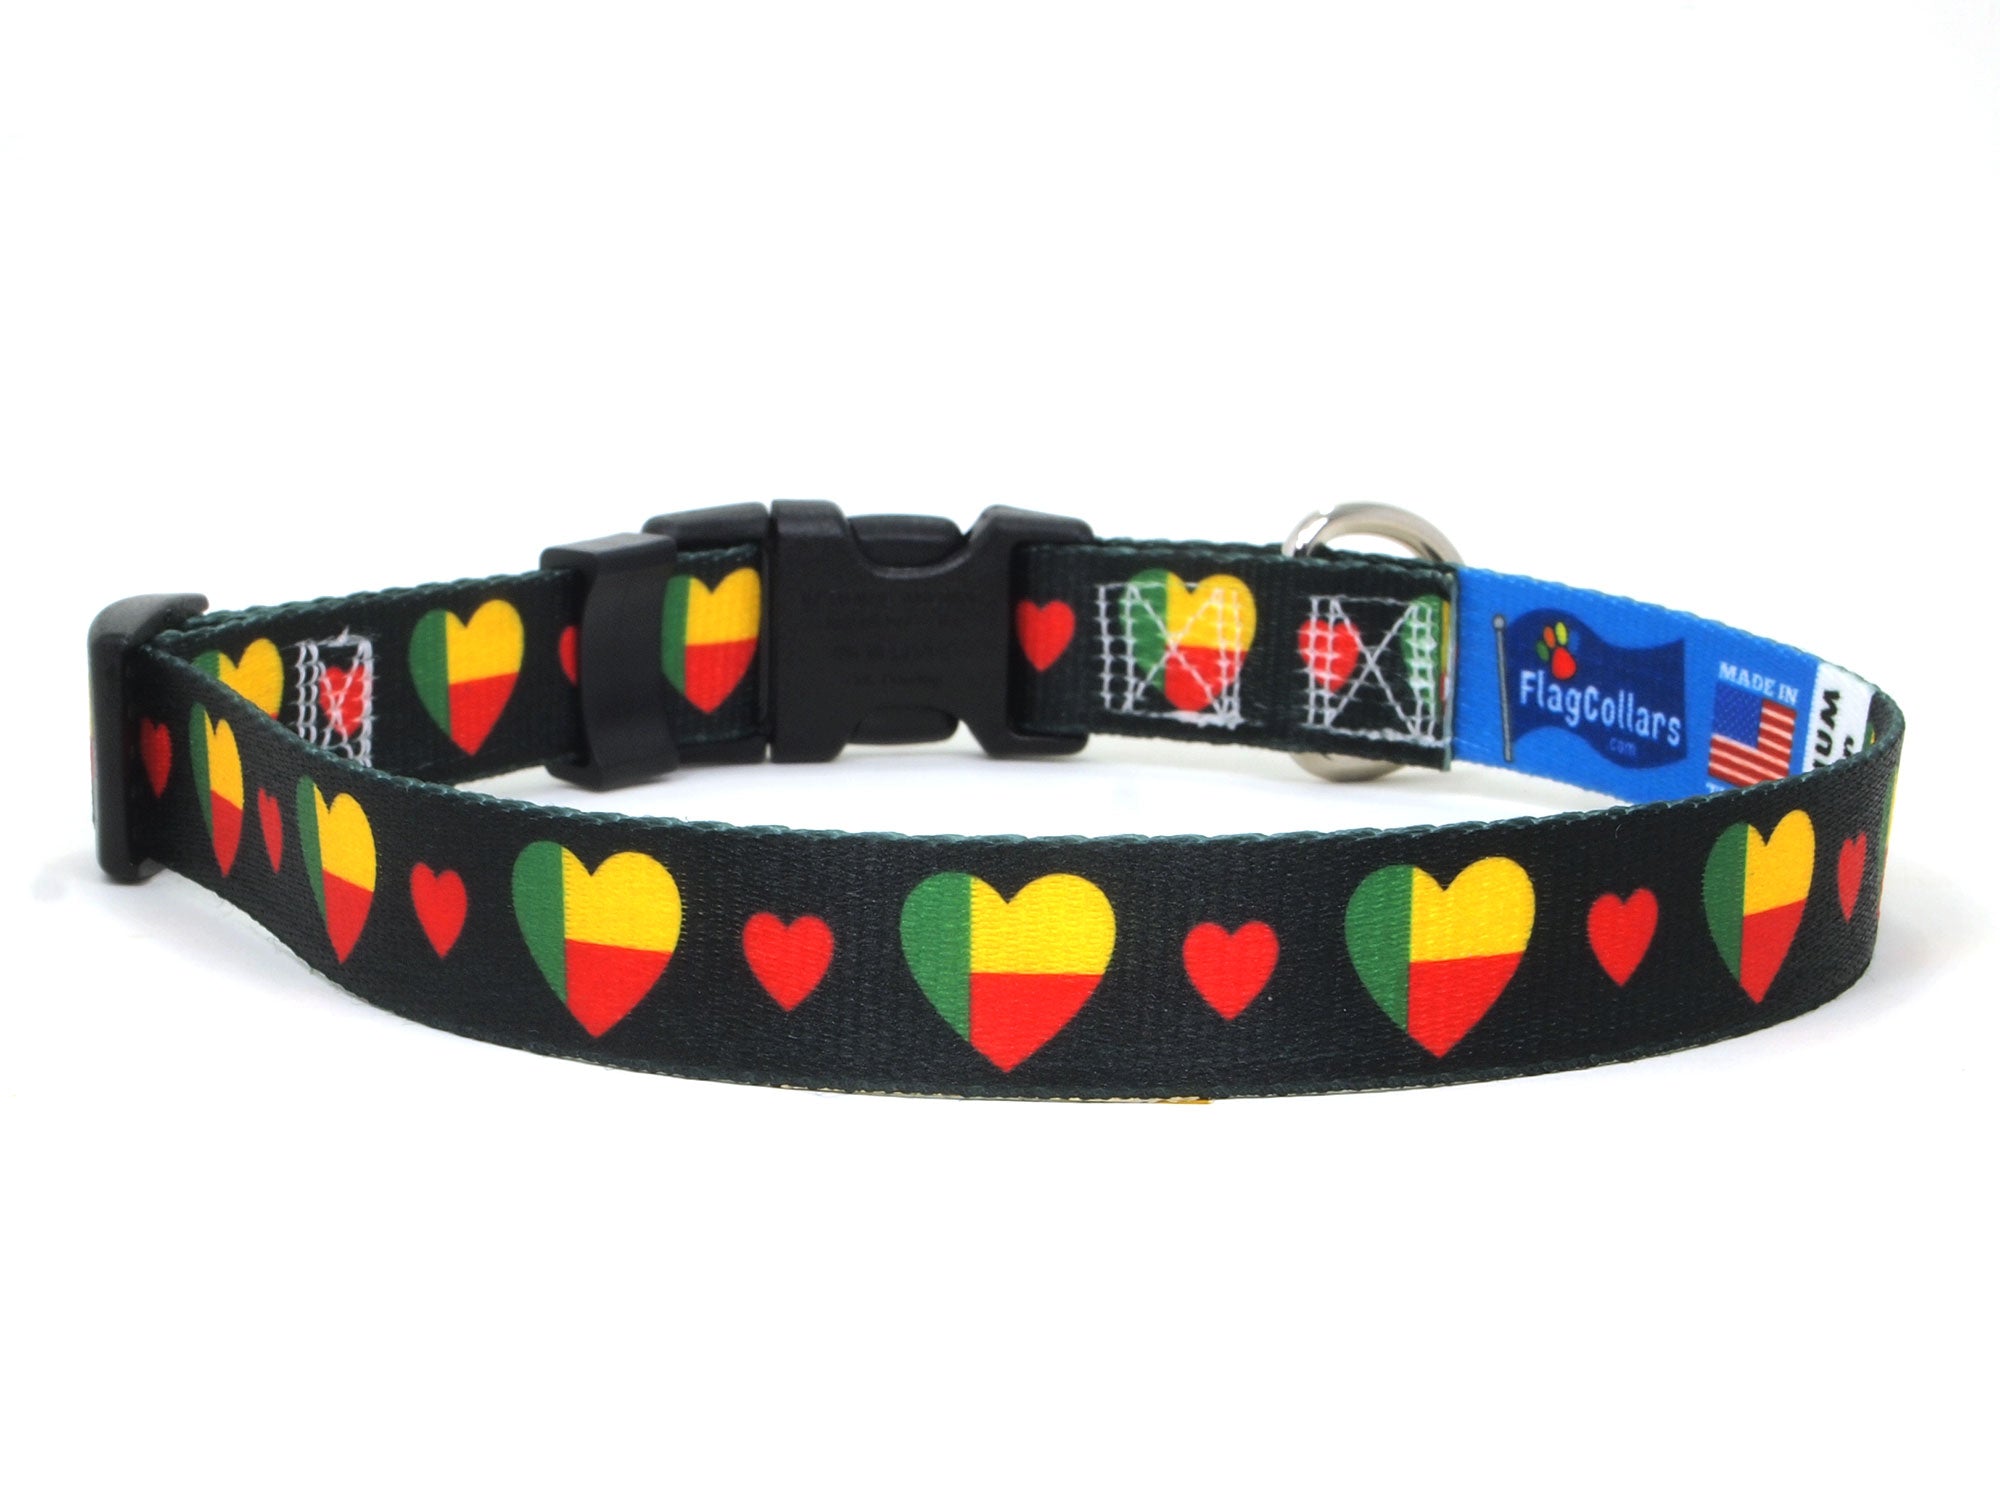 Dog Collar with Benin Hearts Pattern in black